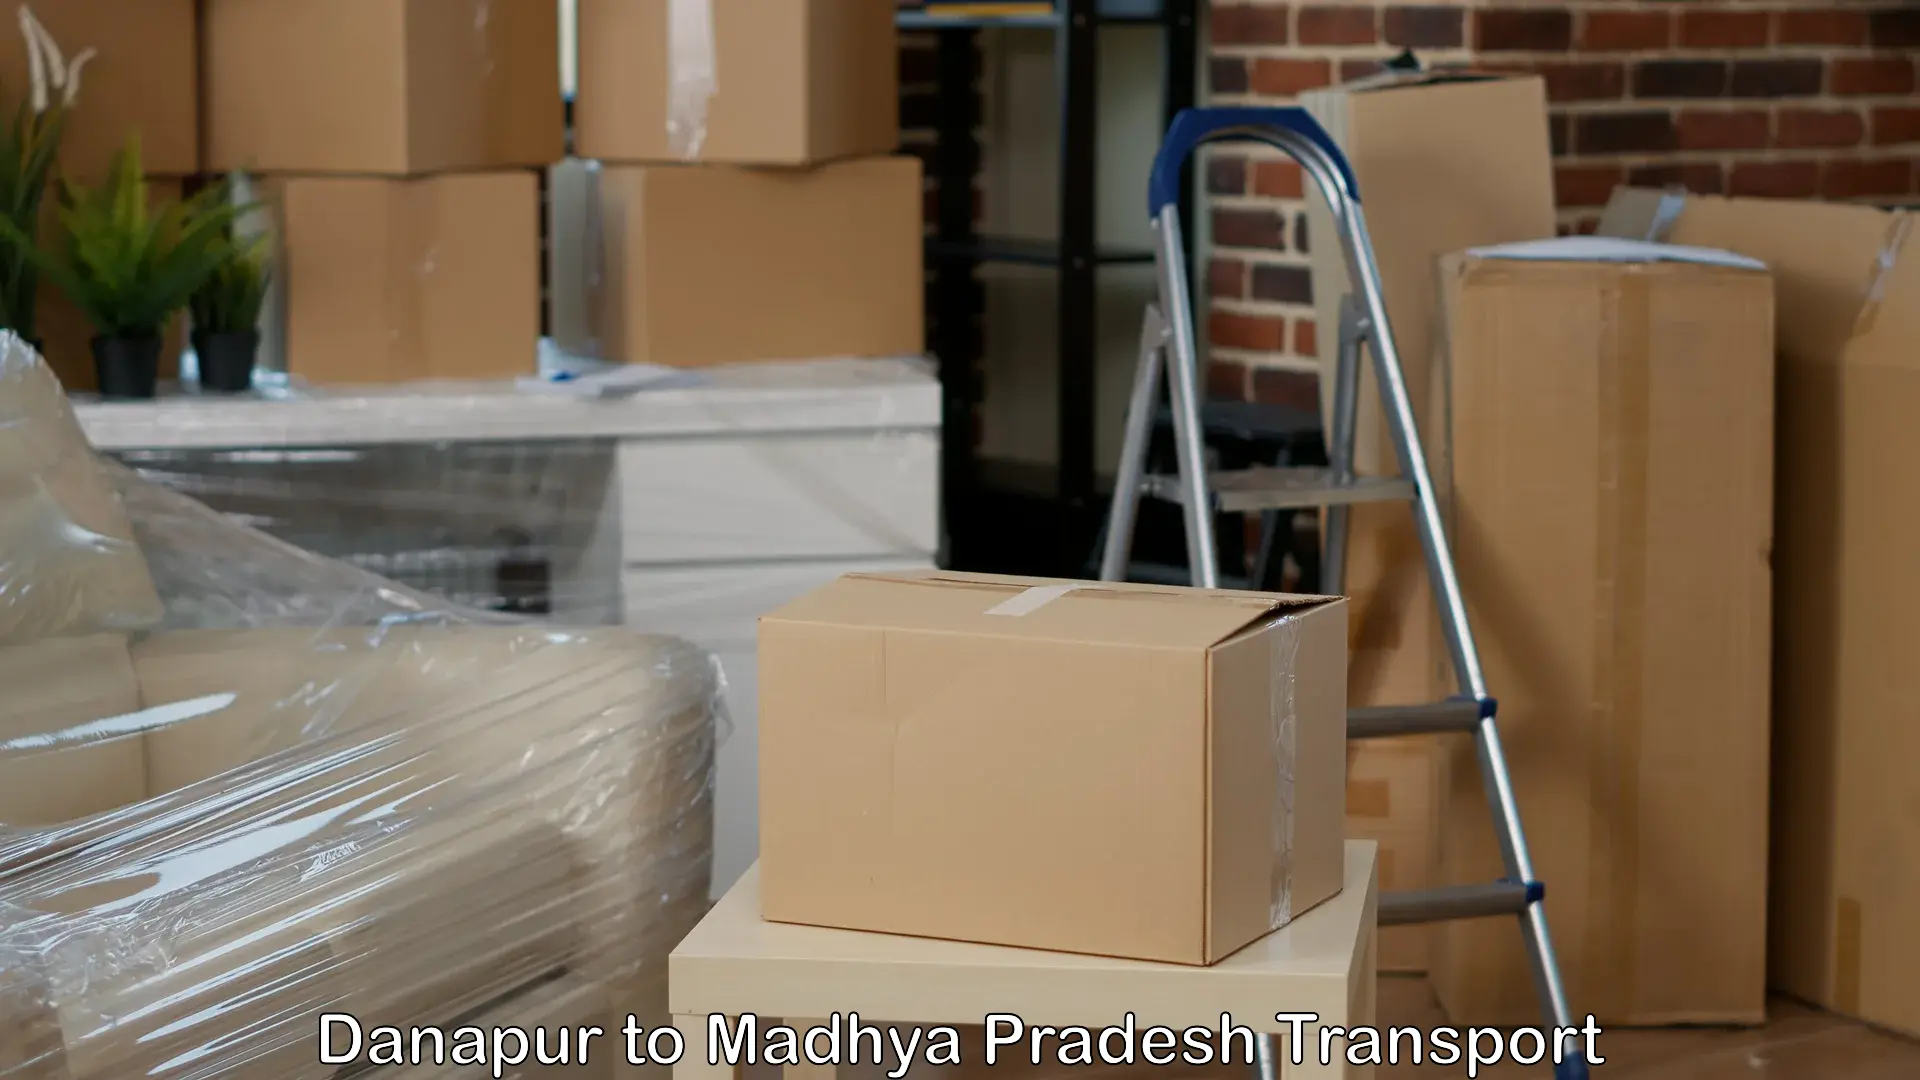 Air cargo transport services in Danapur to Bhopal